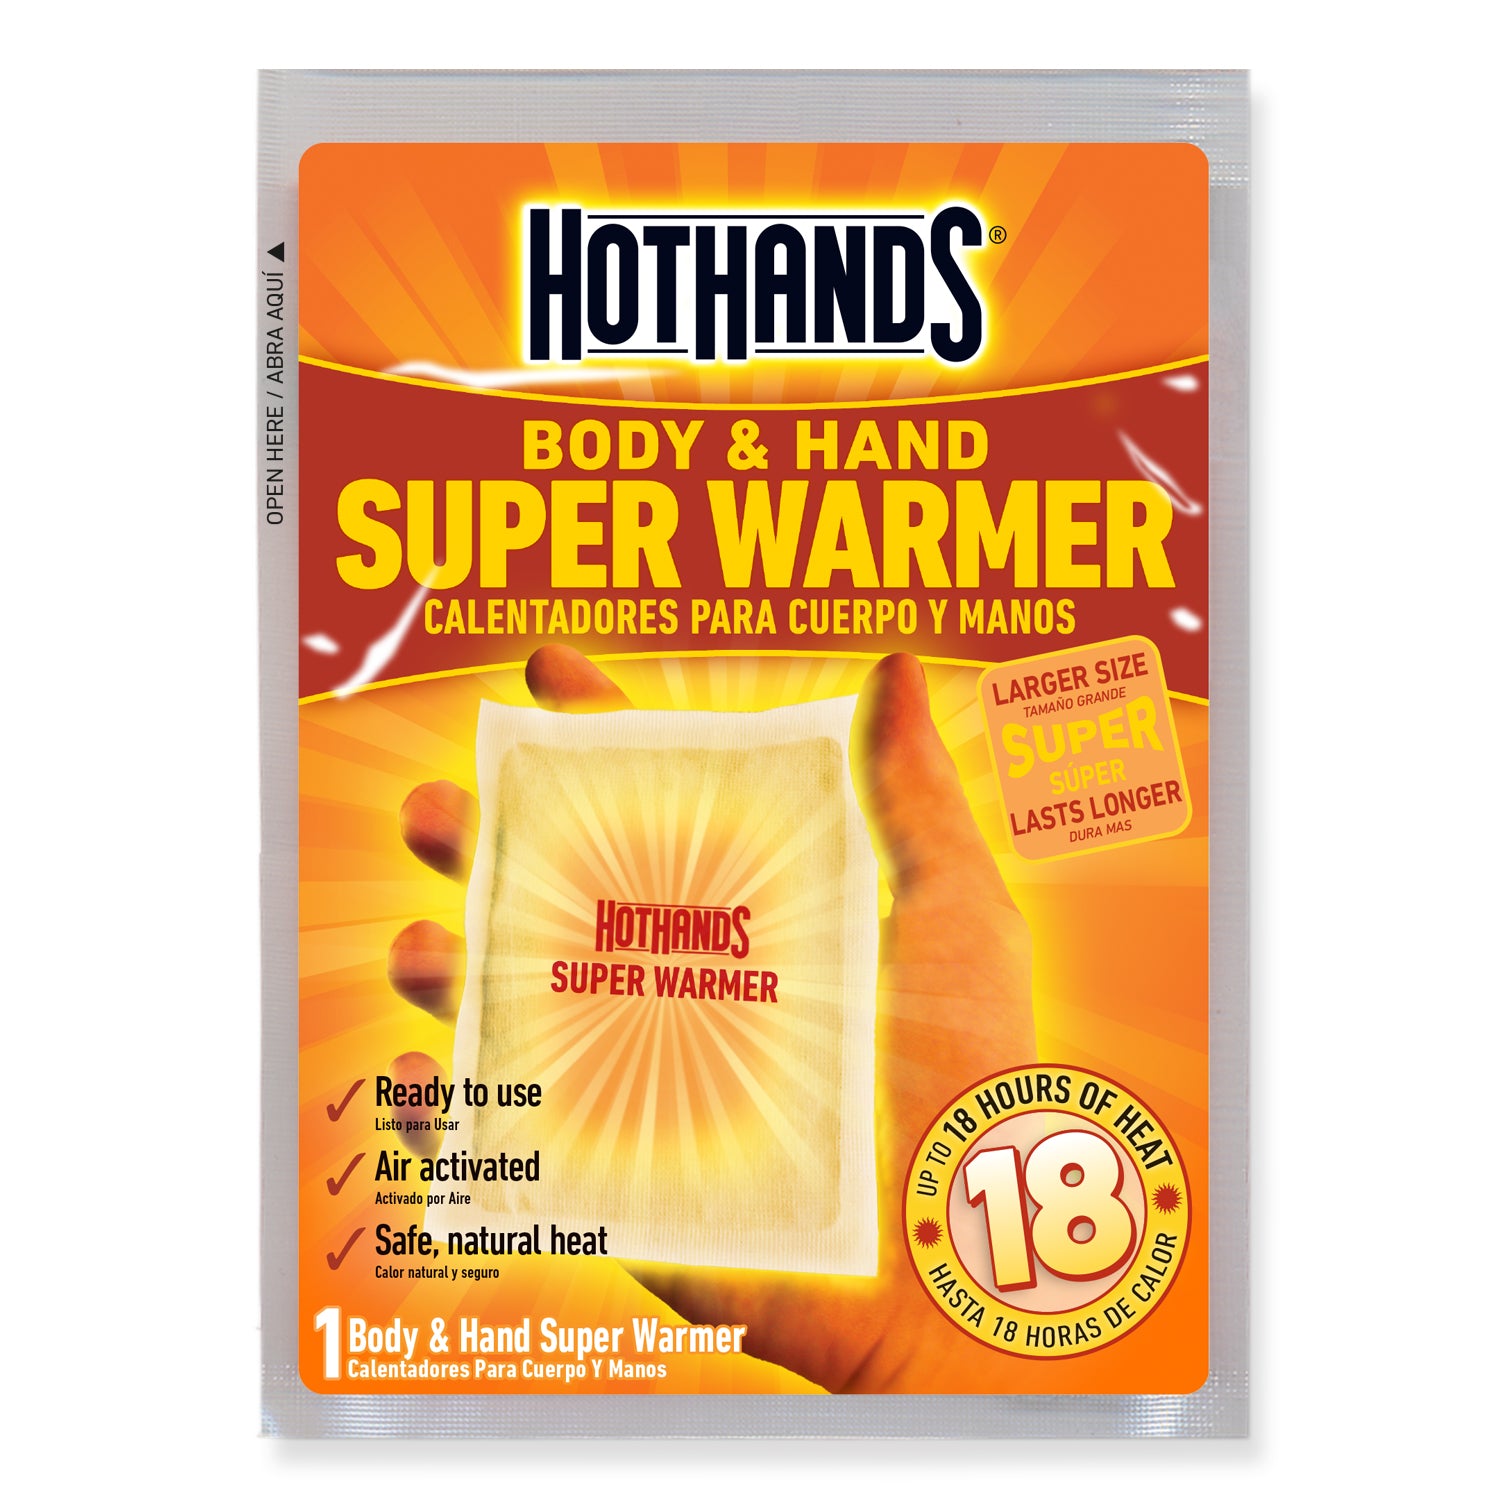 HotHands Body and Hand Super Warmer | HotHands Direct - Hot Hands hand warmers 18 hours, Hot Hands hand and body warmers, extra large hand warmers